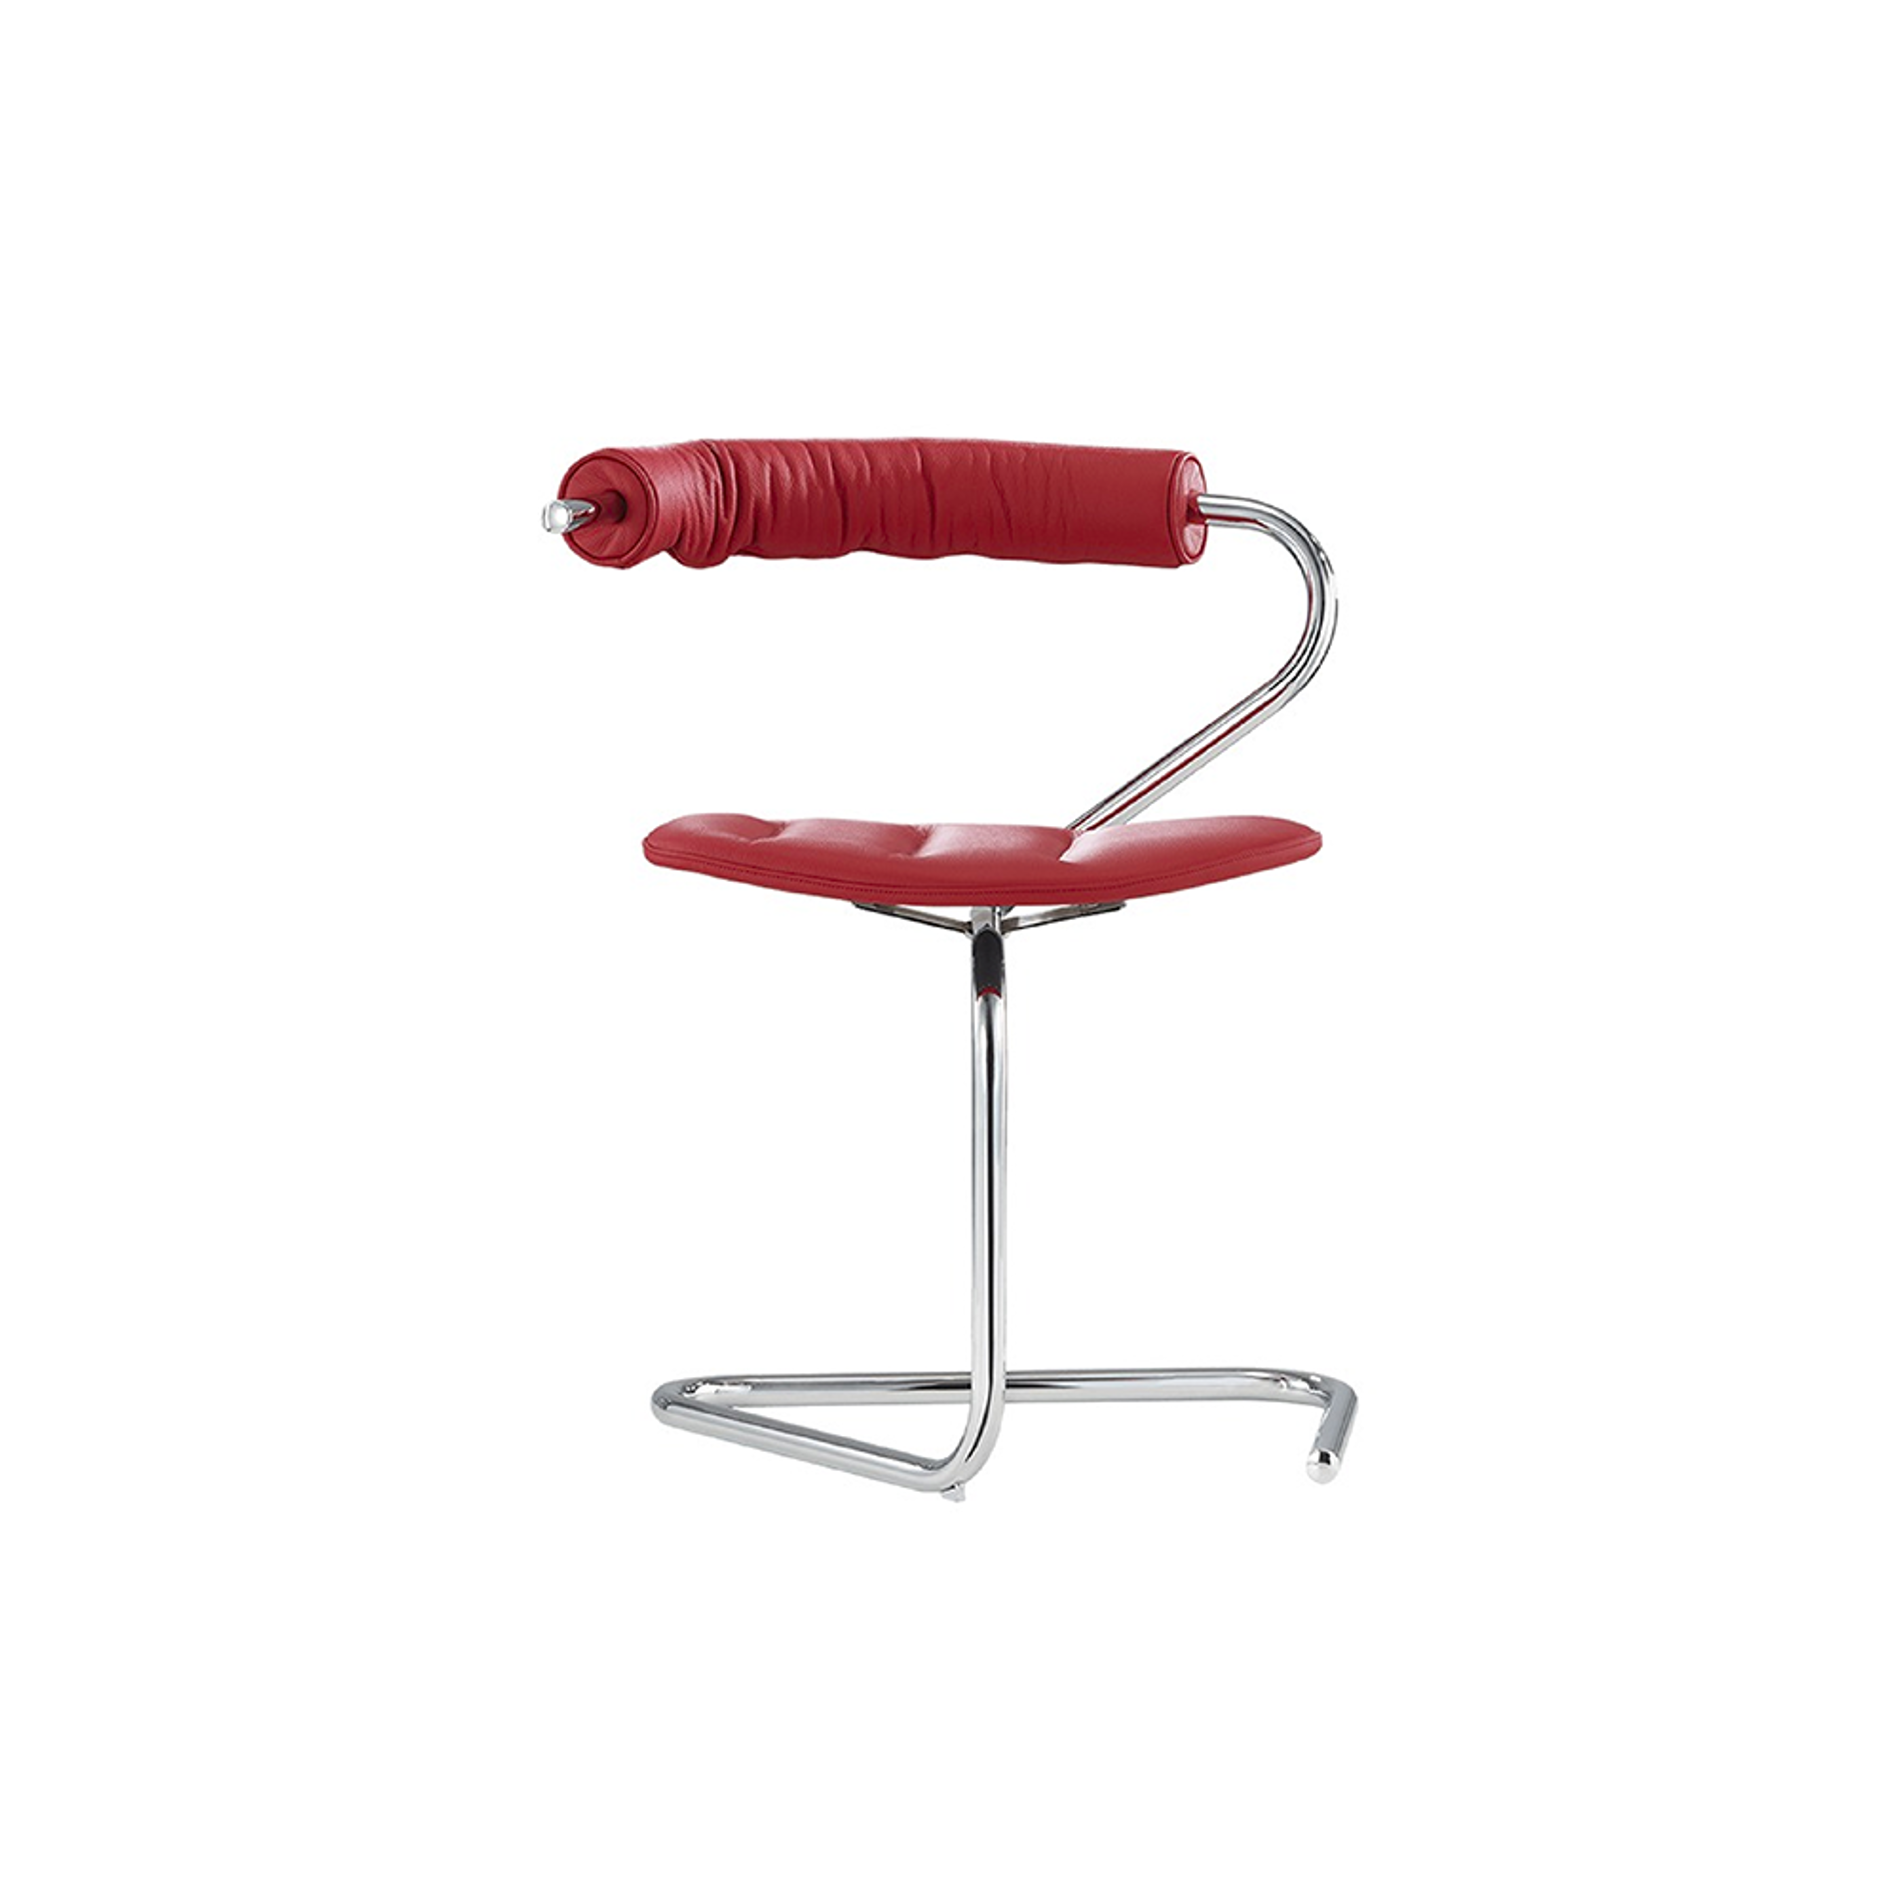 TECTA B5 Chair - Red / Leather 1 (Pre-Order)